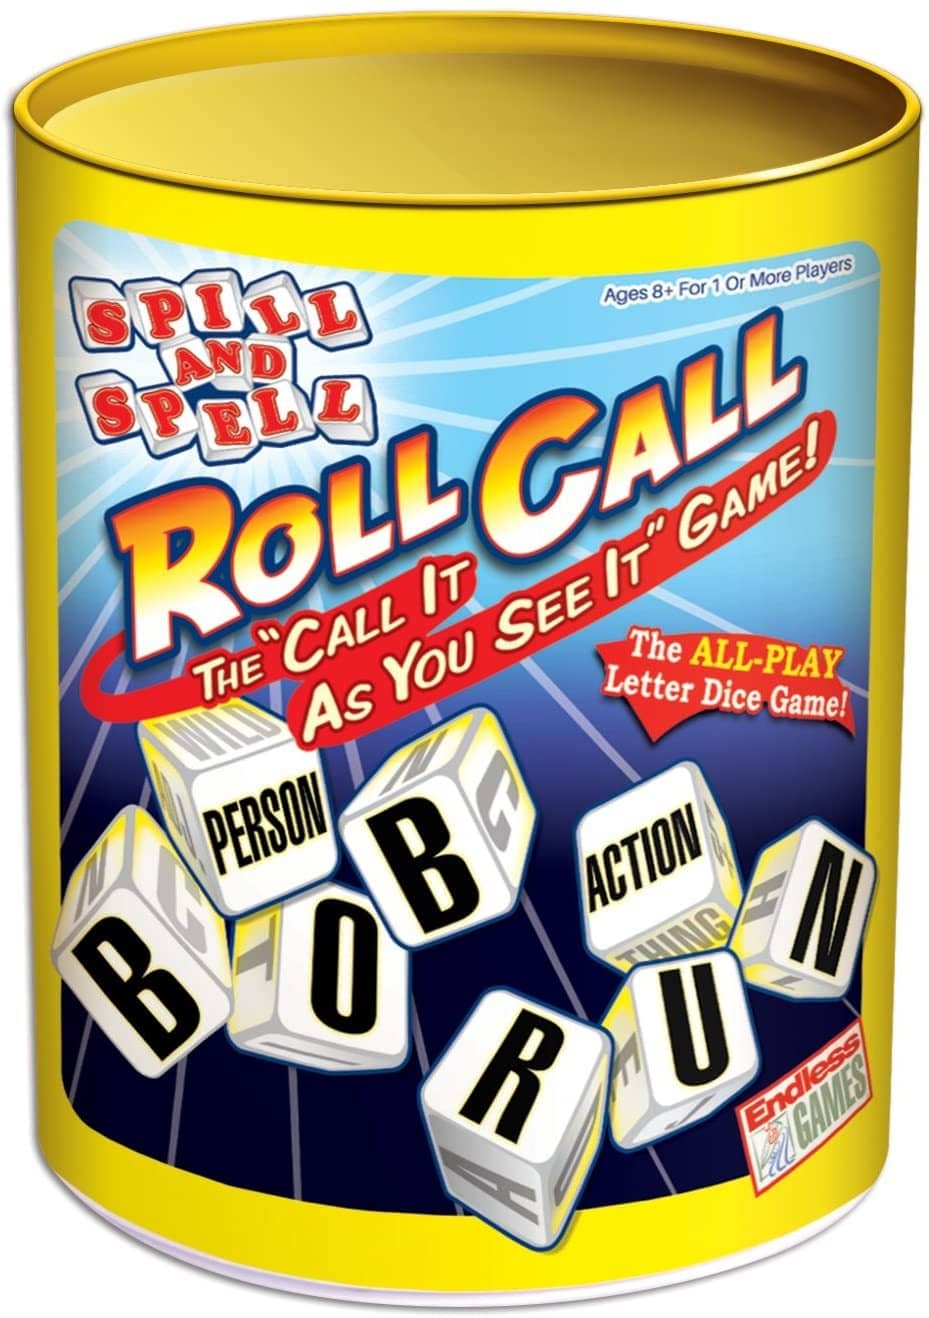 Spill And Spell Roll Call Game-Kidding Around NYC